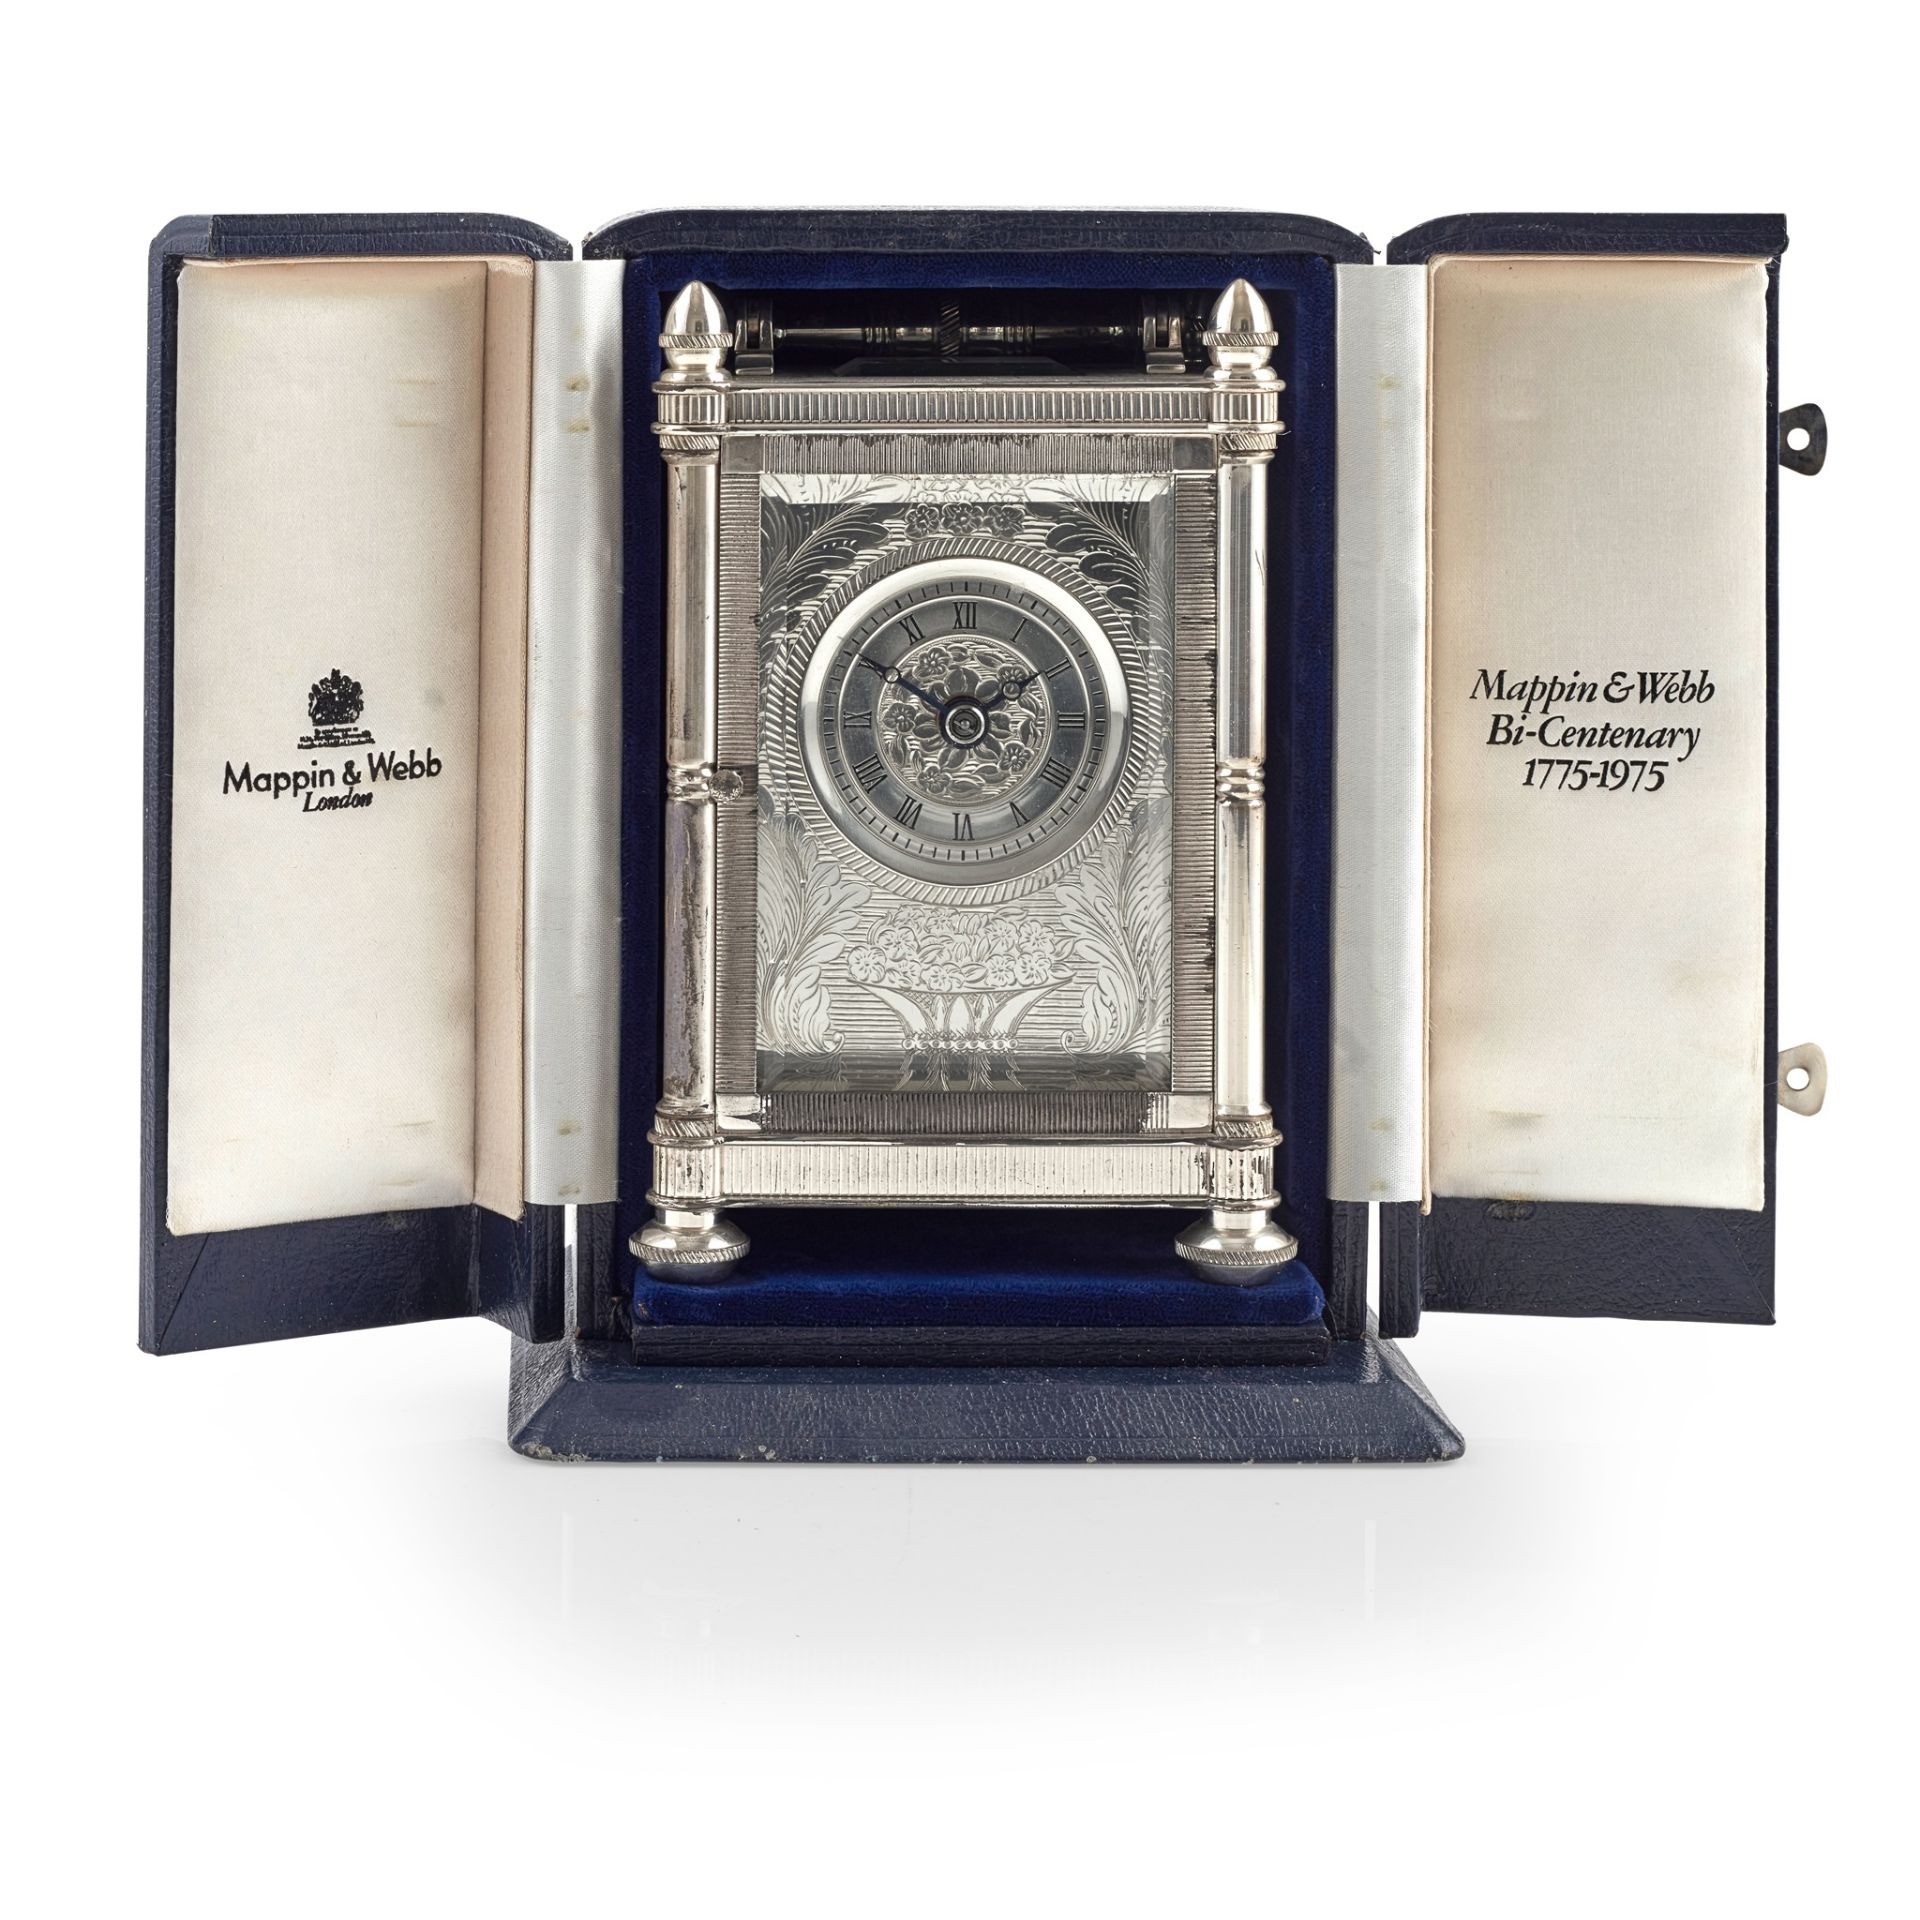 The Mappin & Webb Bi-centenary carriage clock - Image 4 of 4